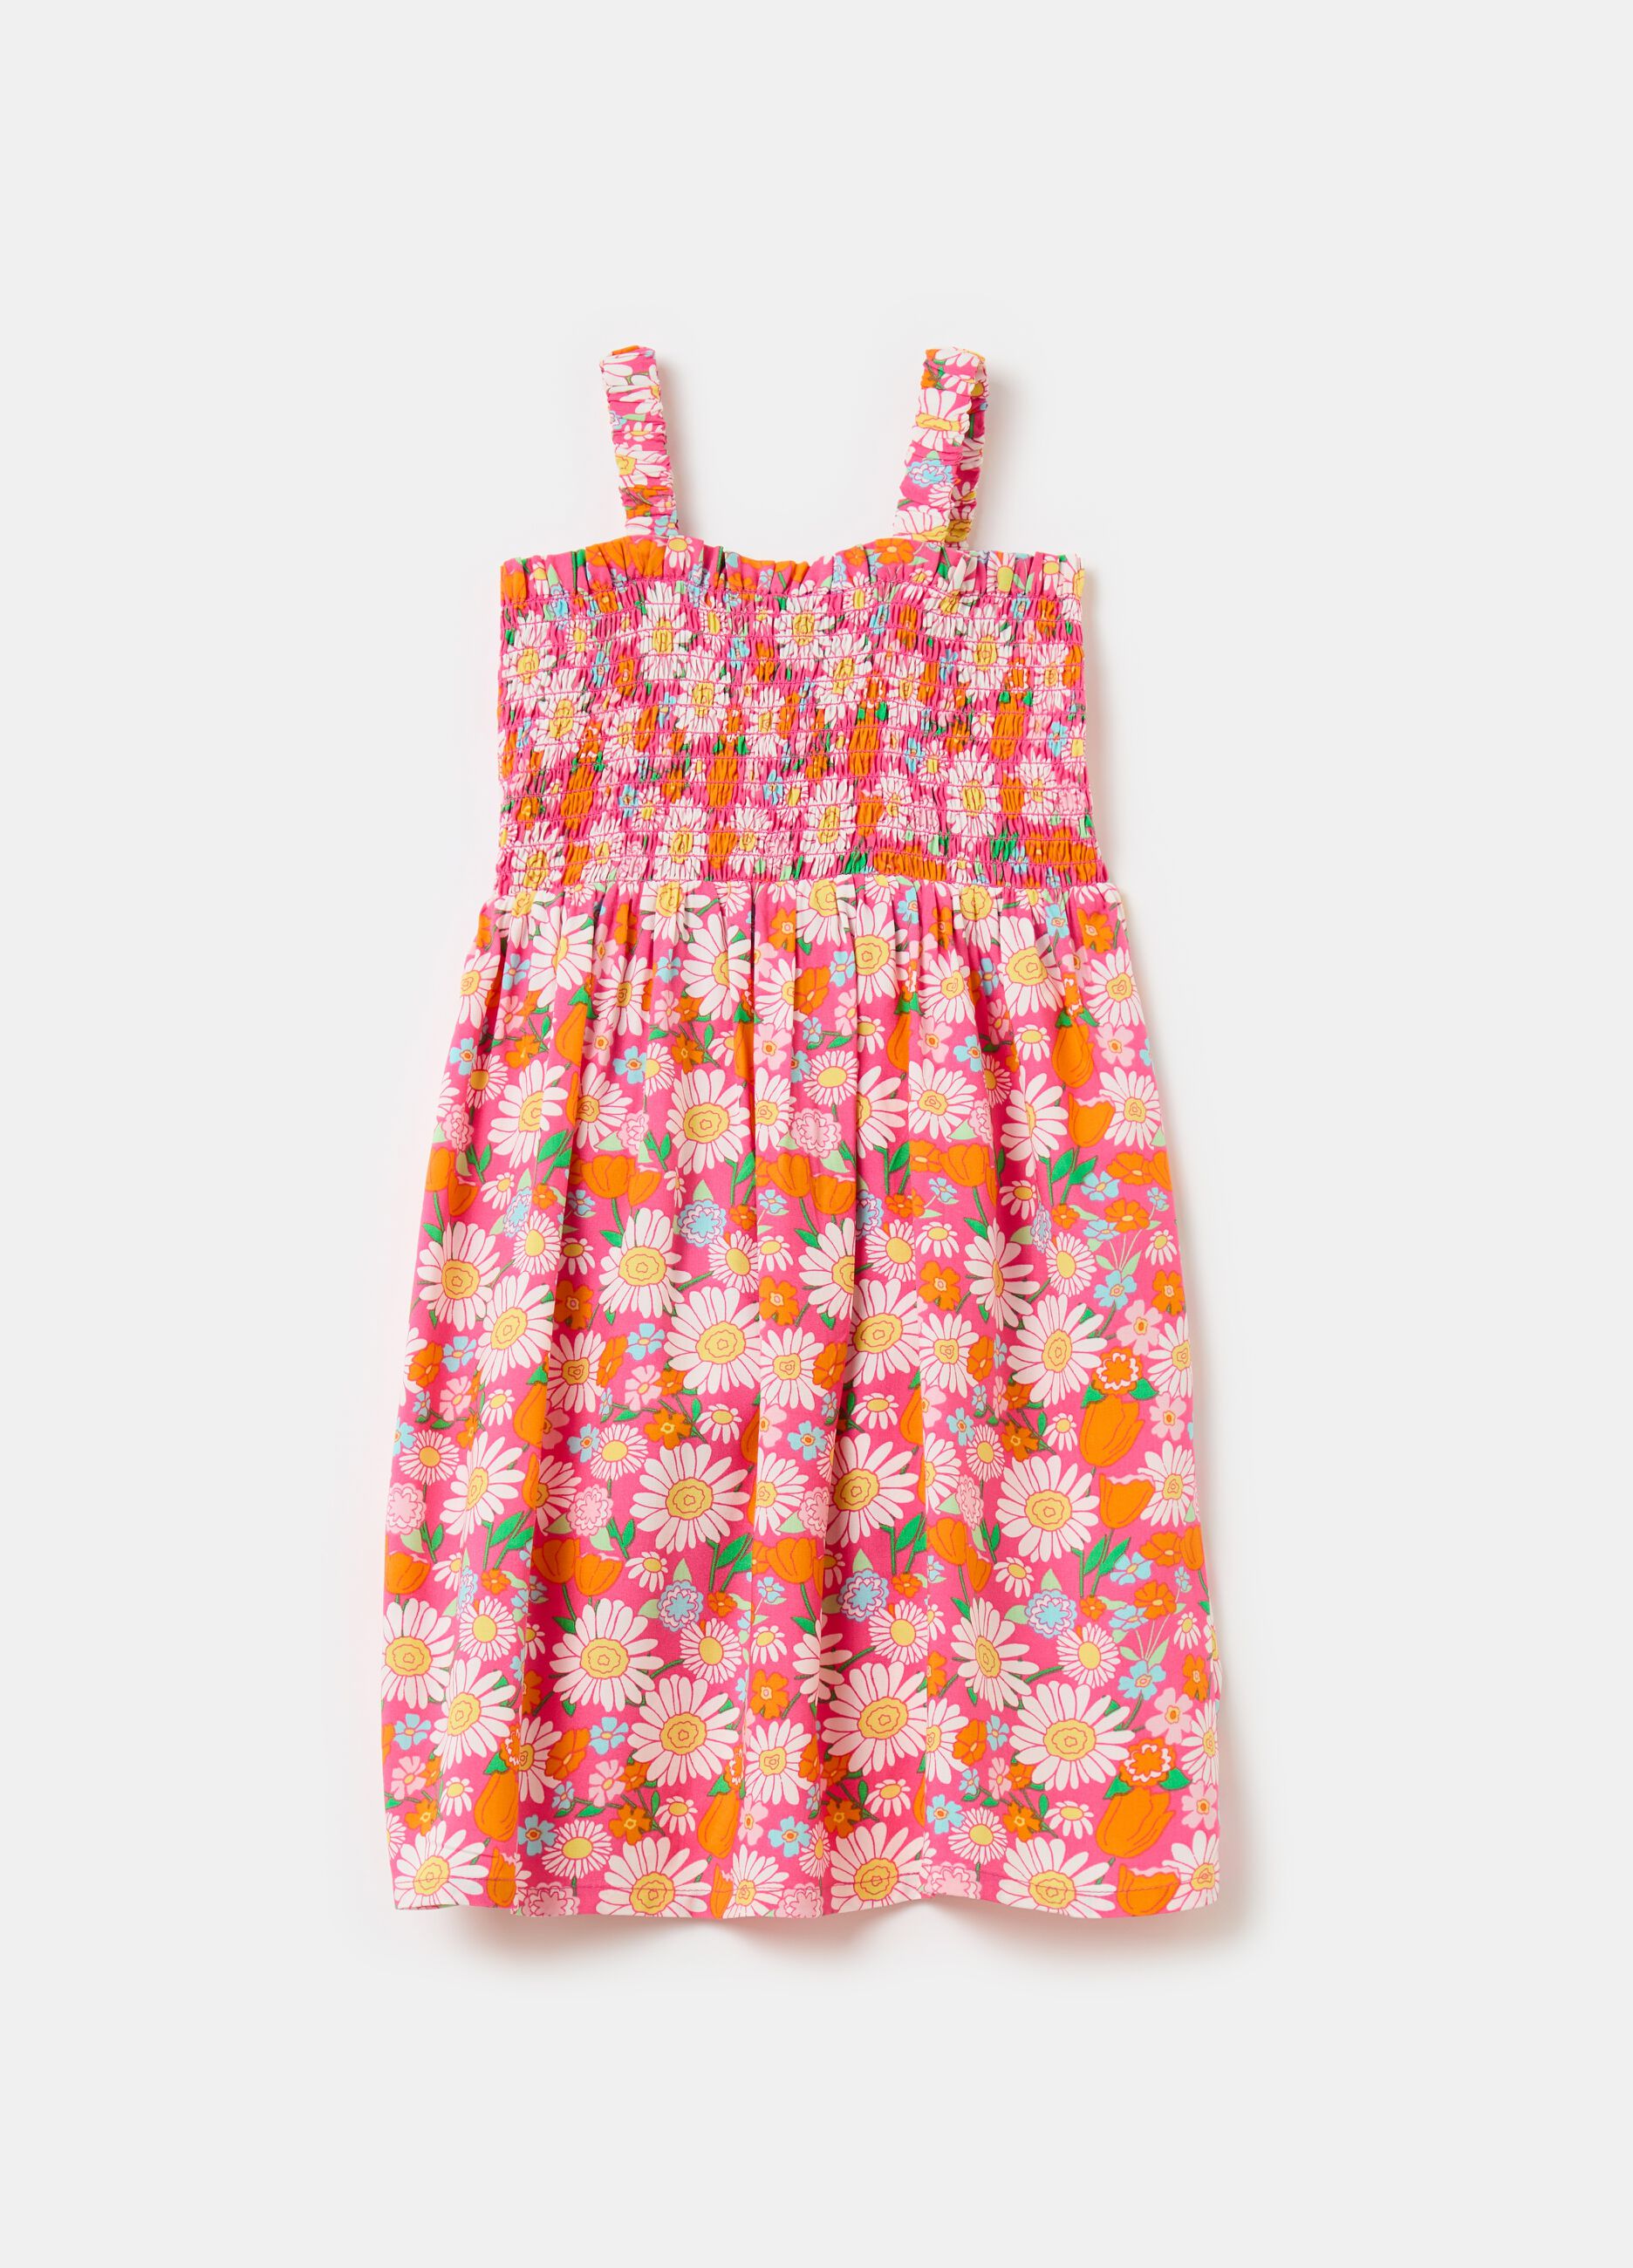 Floral dress with smock stitching